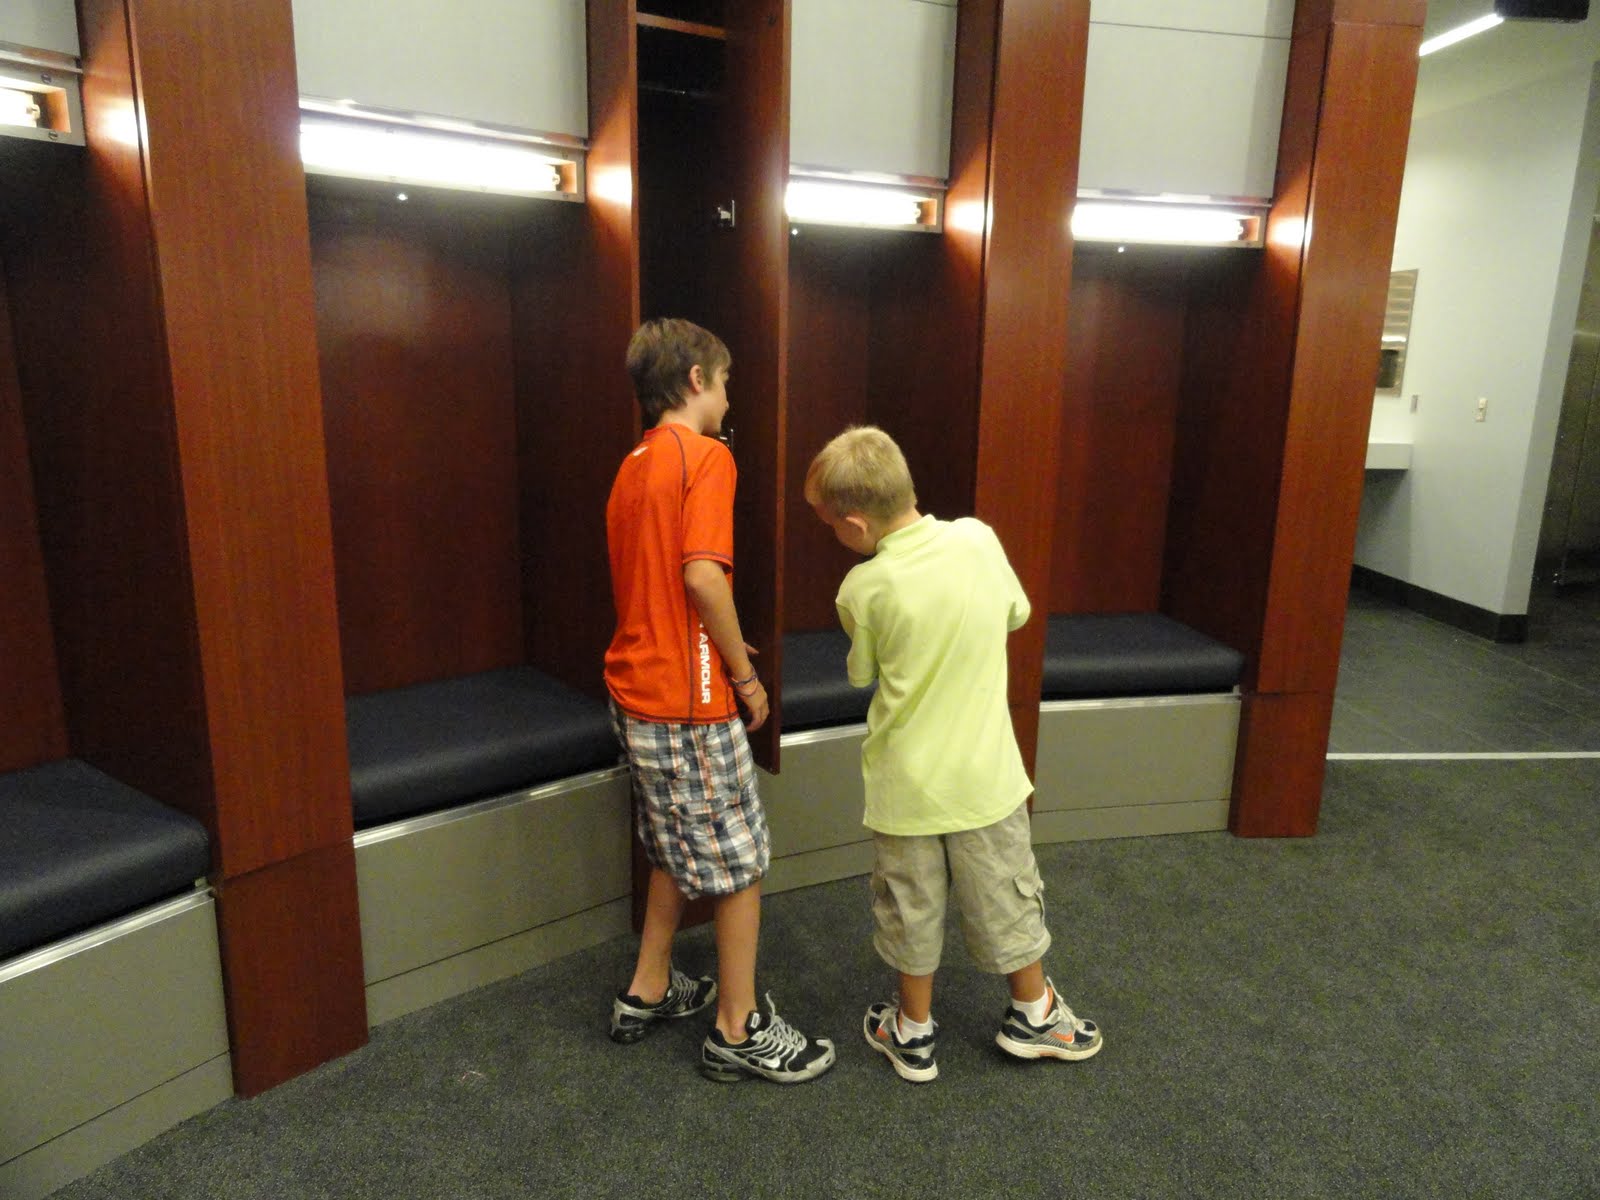  And Harrison Investigating The Player S Locker Room Each Cubby Image